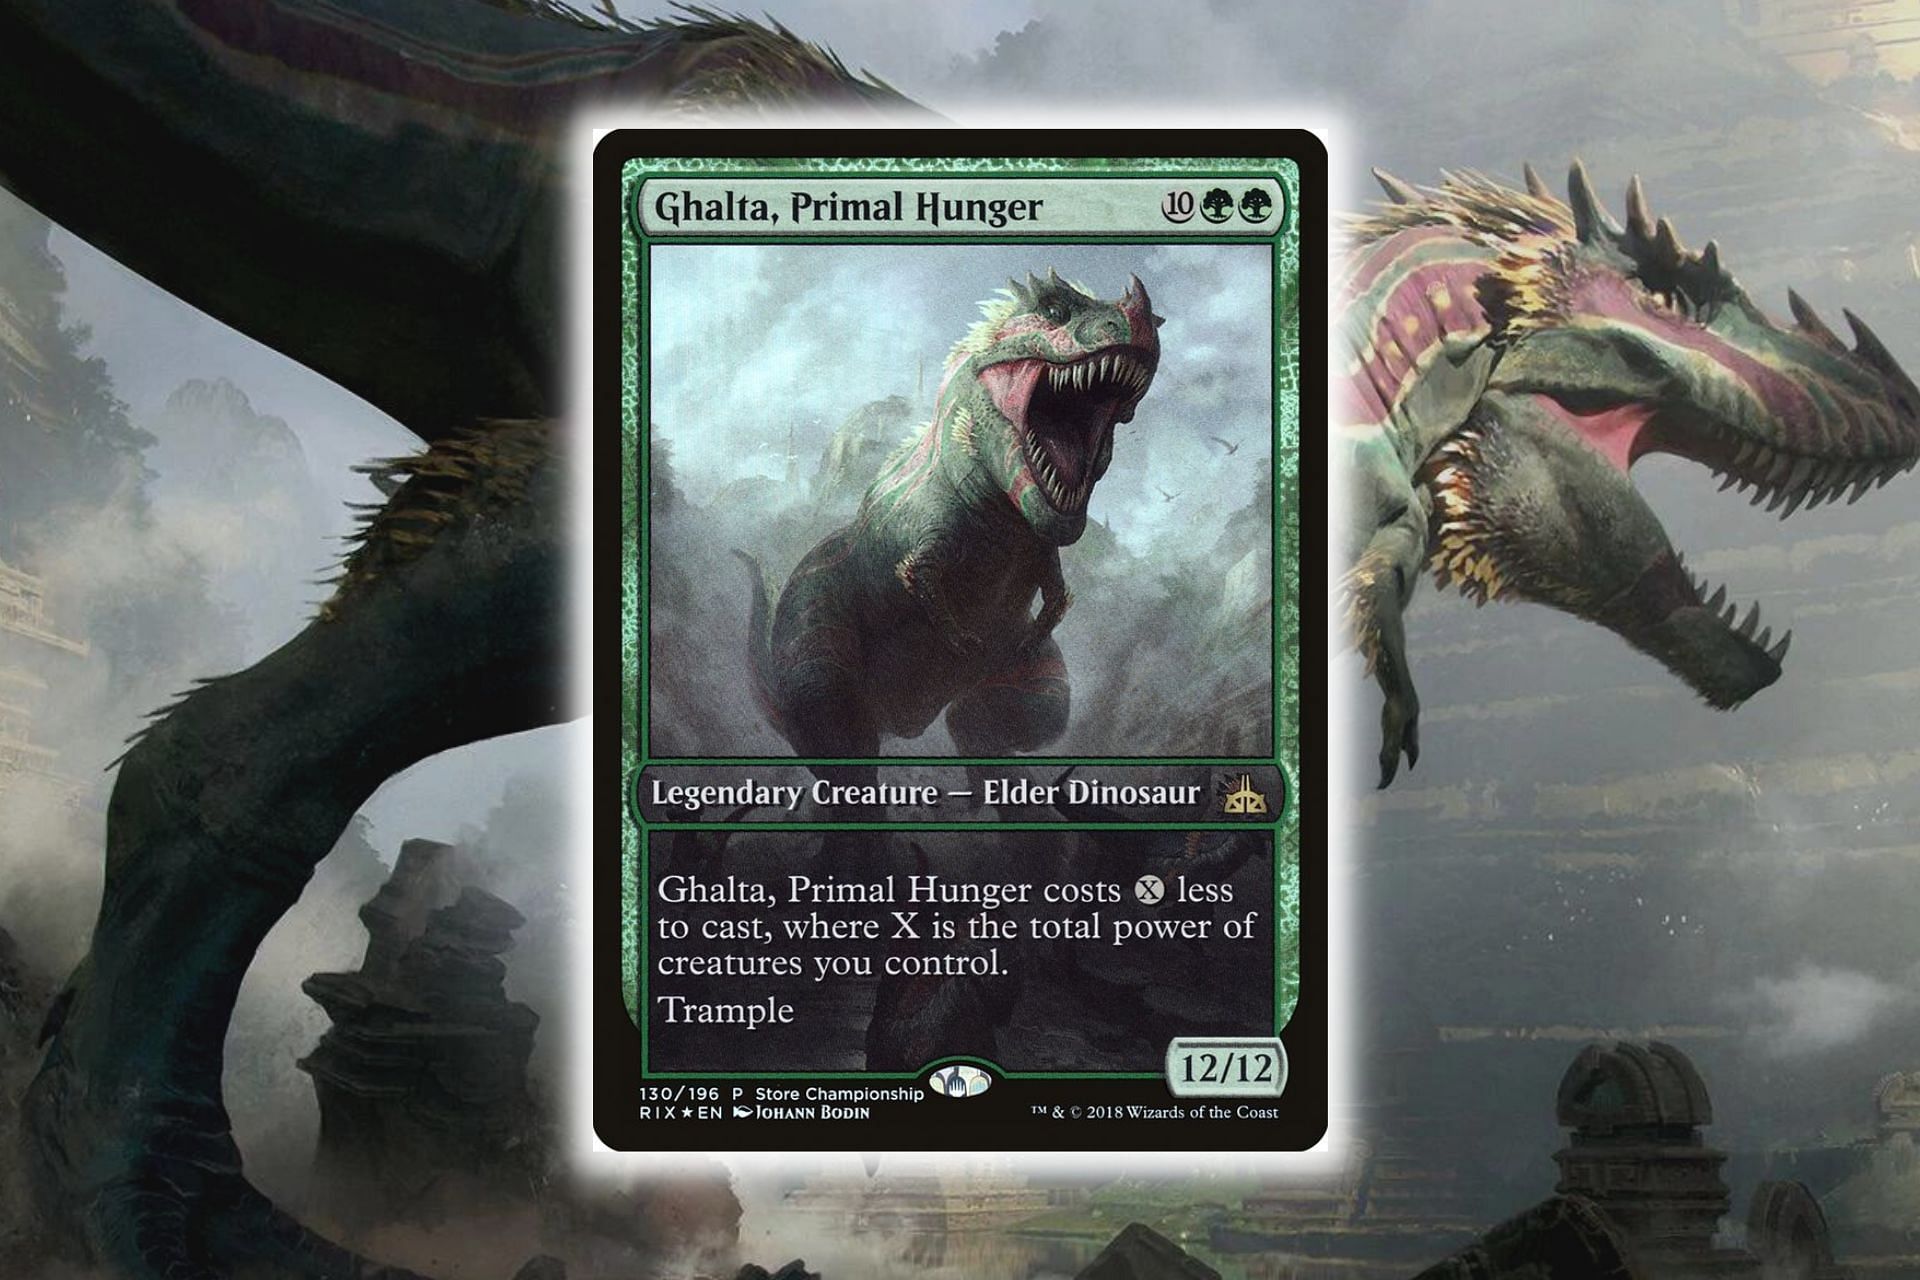 Ghalta, Primal Hunger in Magic: The Gathering (Image via Wizards of the Coast)